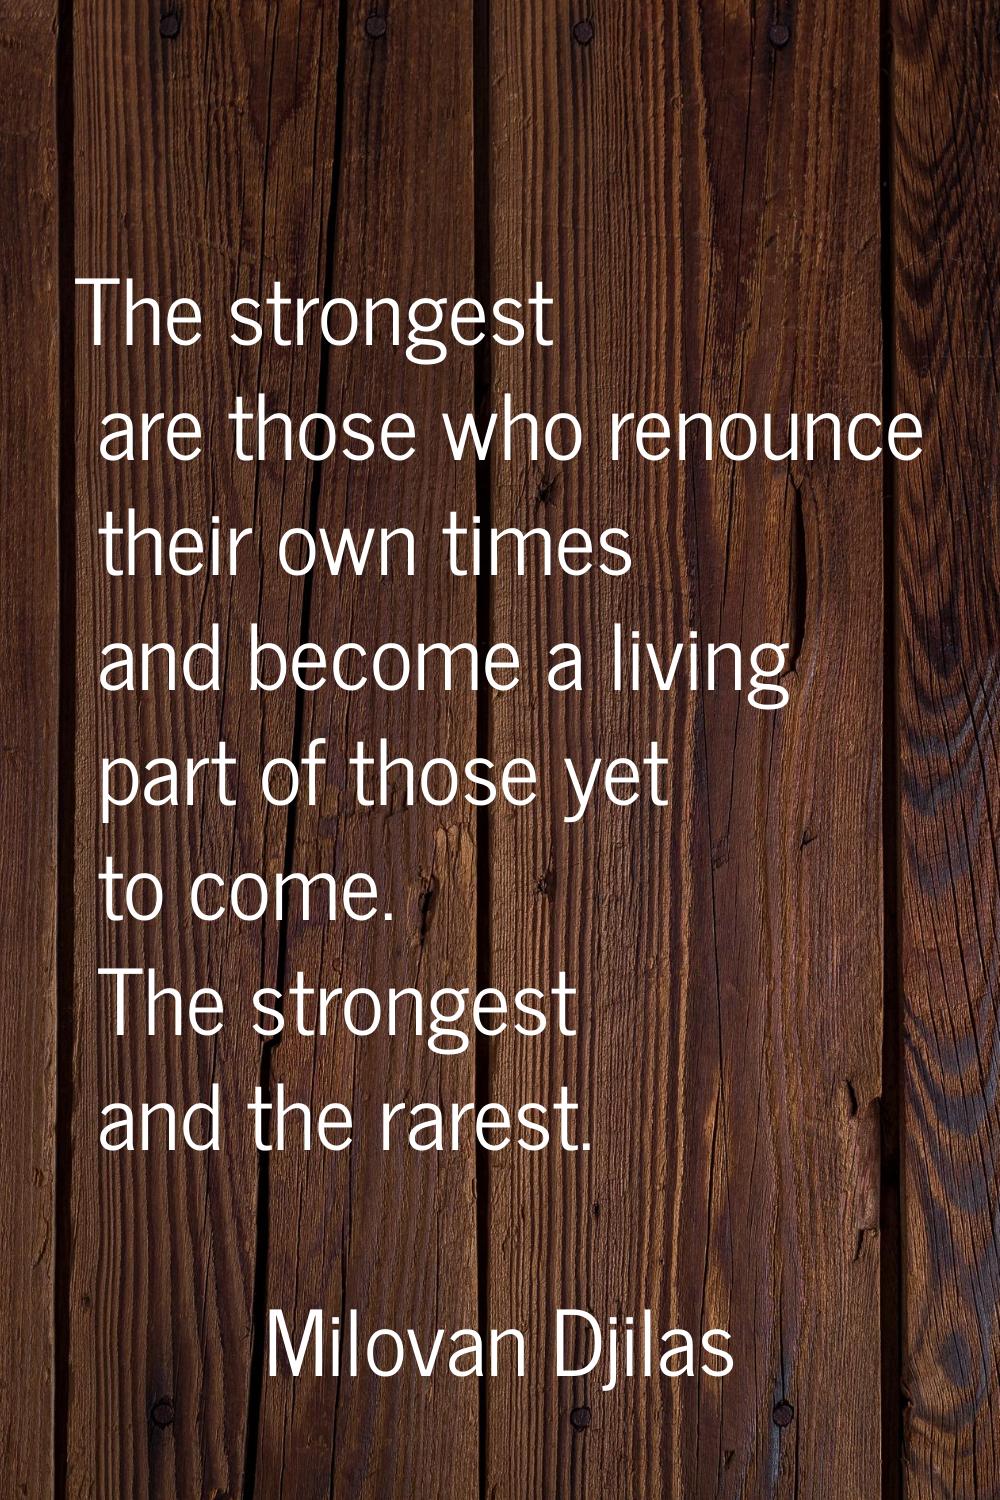 The strongest are those who renounce their own times and become a living part of those yet to come.